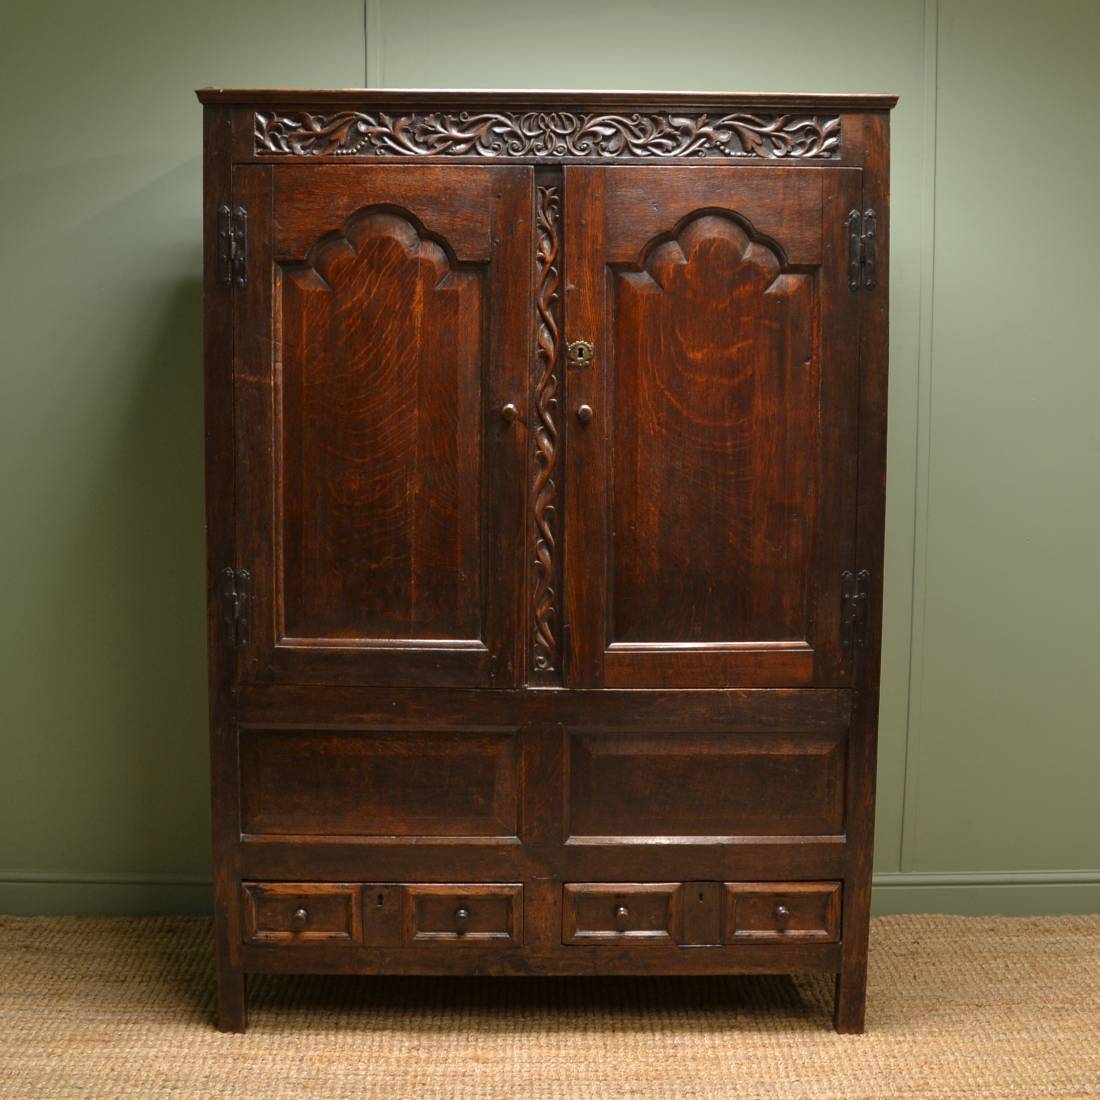 Early Eighteenth Century Antique Harness Cupboard with leaf and berry design carvings. 